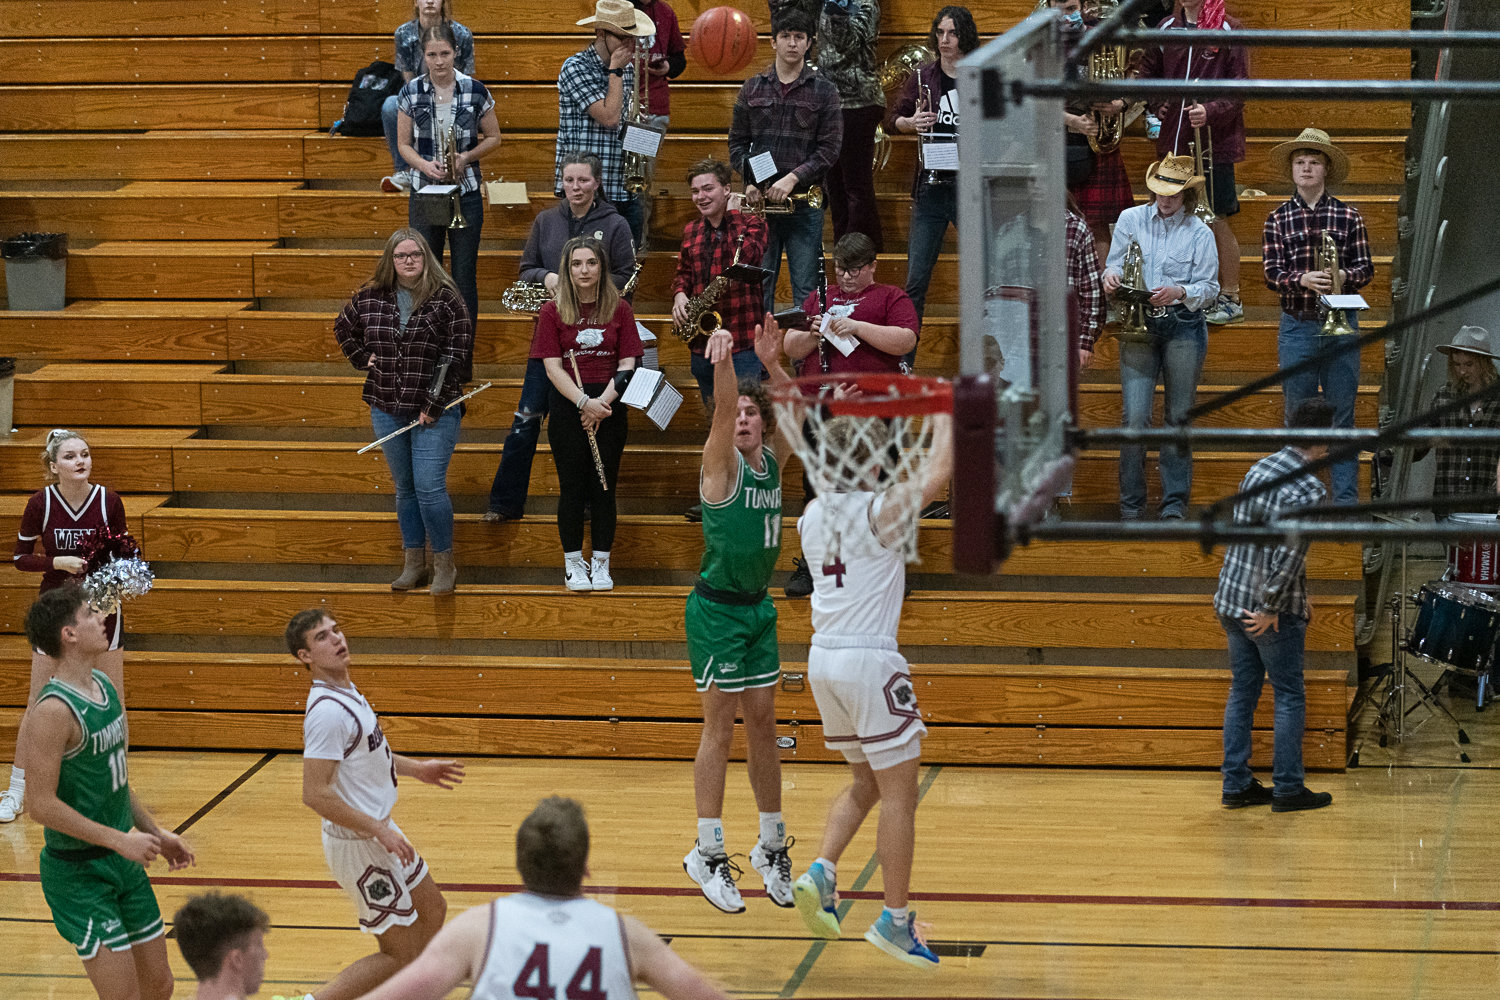 Luke Brewer launches a 3-pointer during the first half of Tumwater's 71-58 win over W.F. West on Jan. 11.